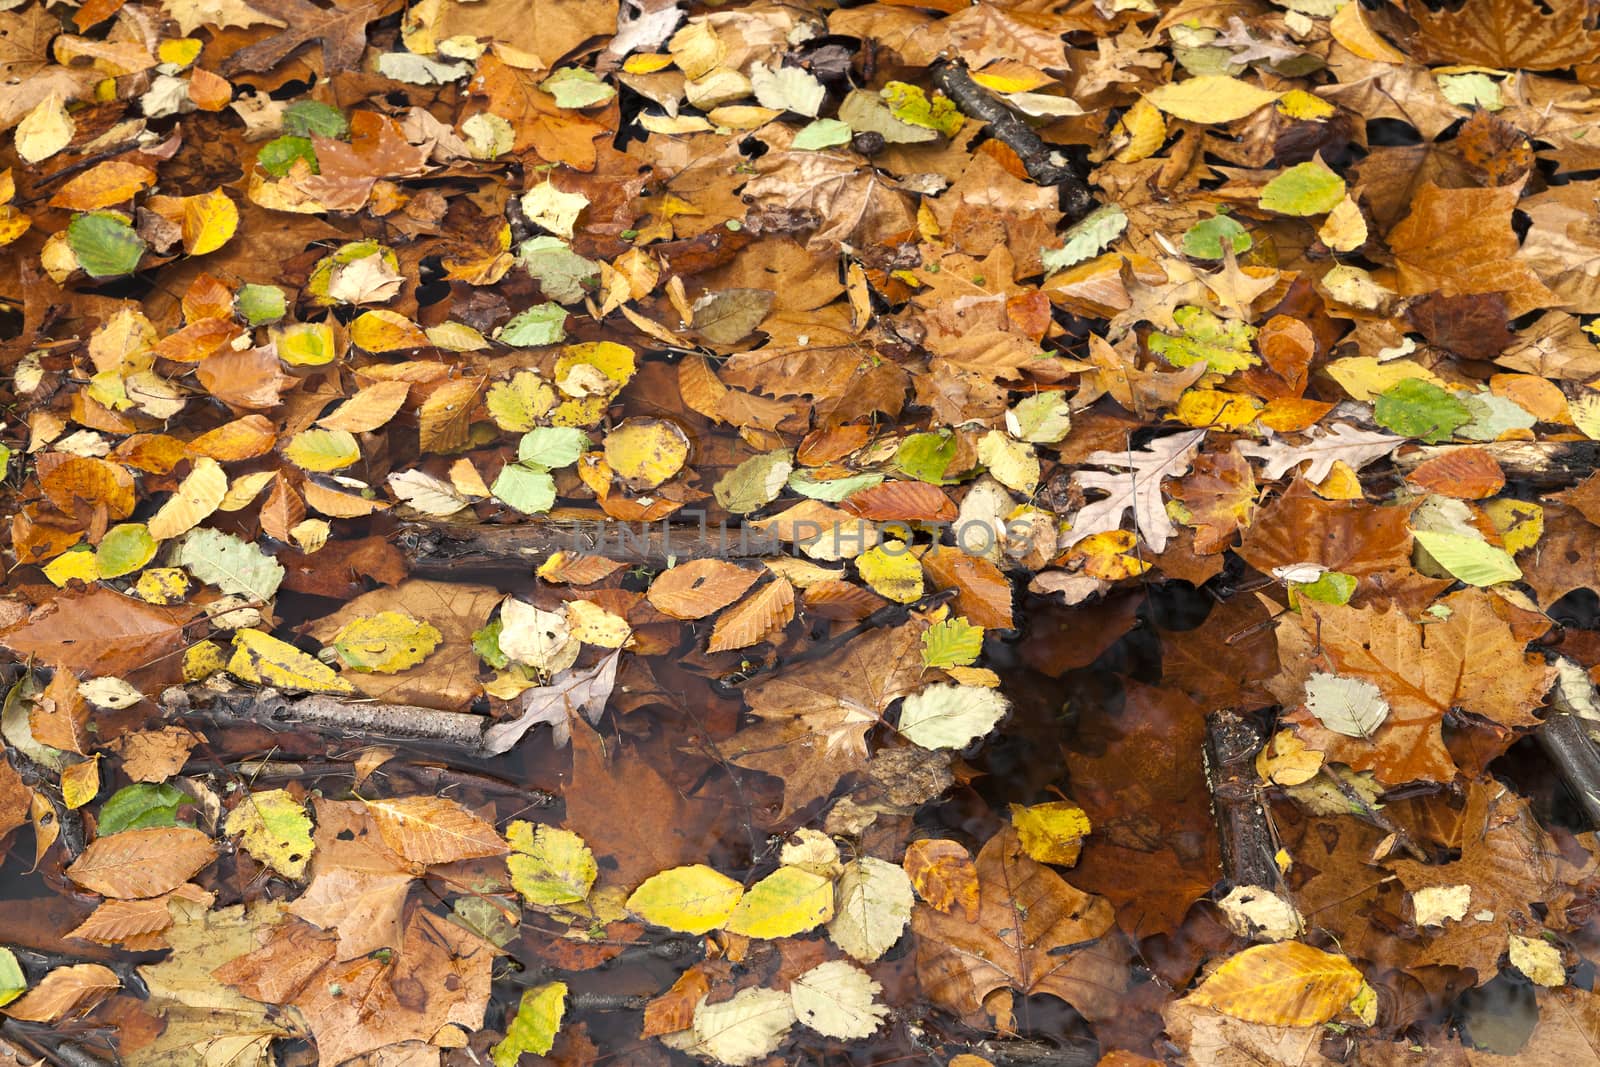 Abstract background of autumn leaves by hanusst